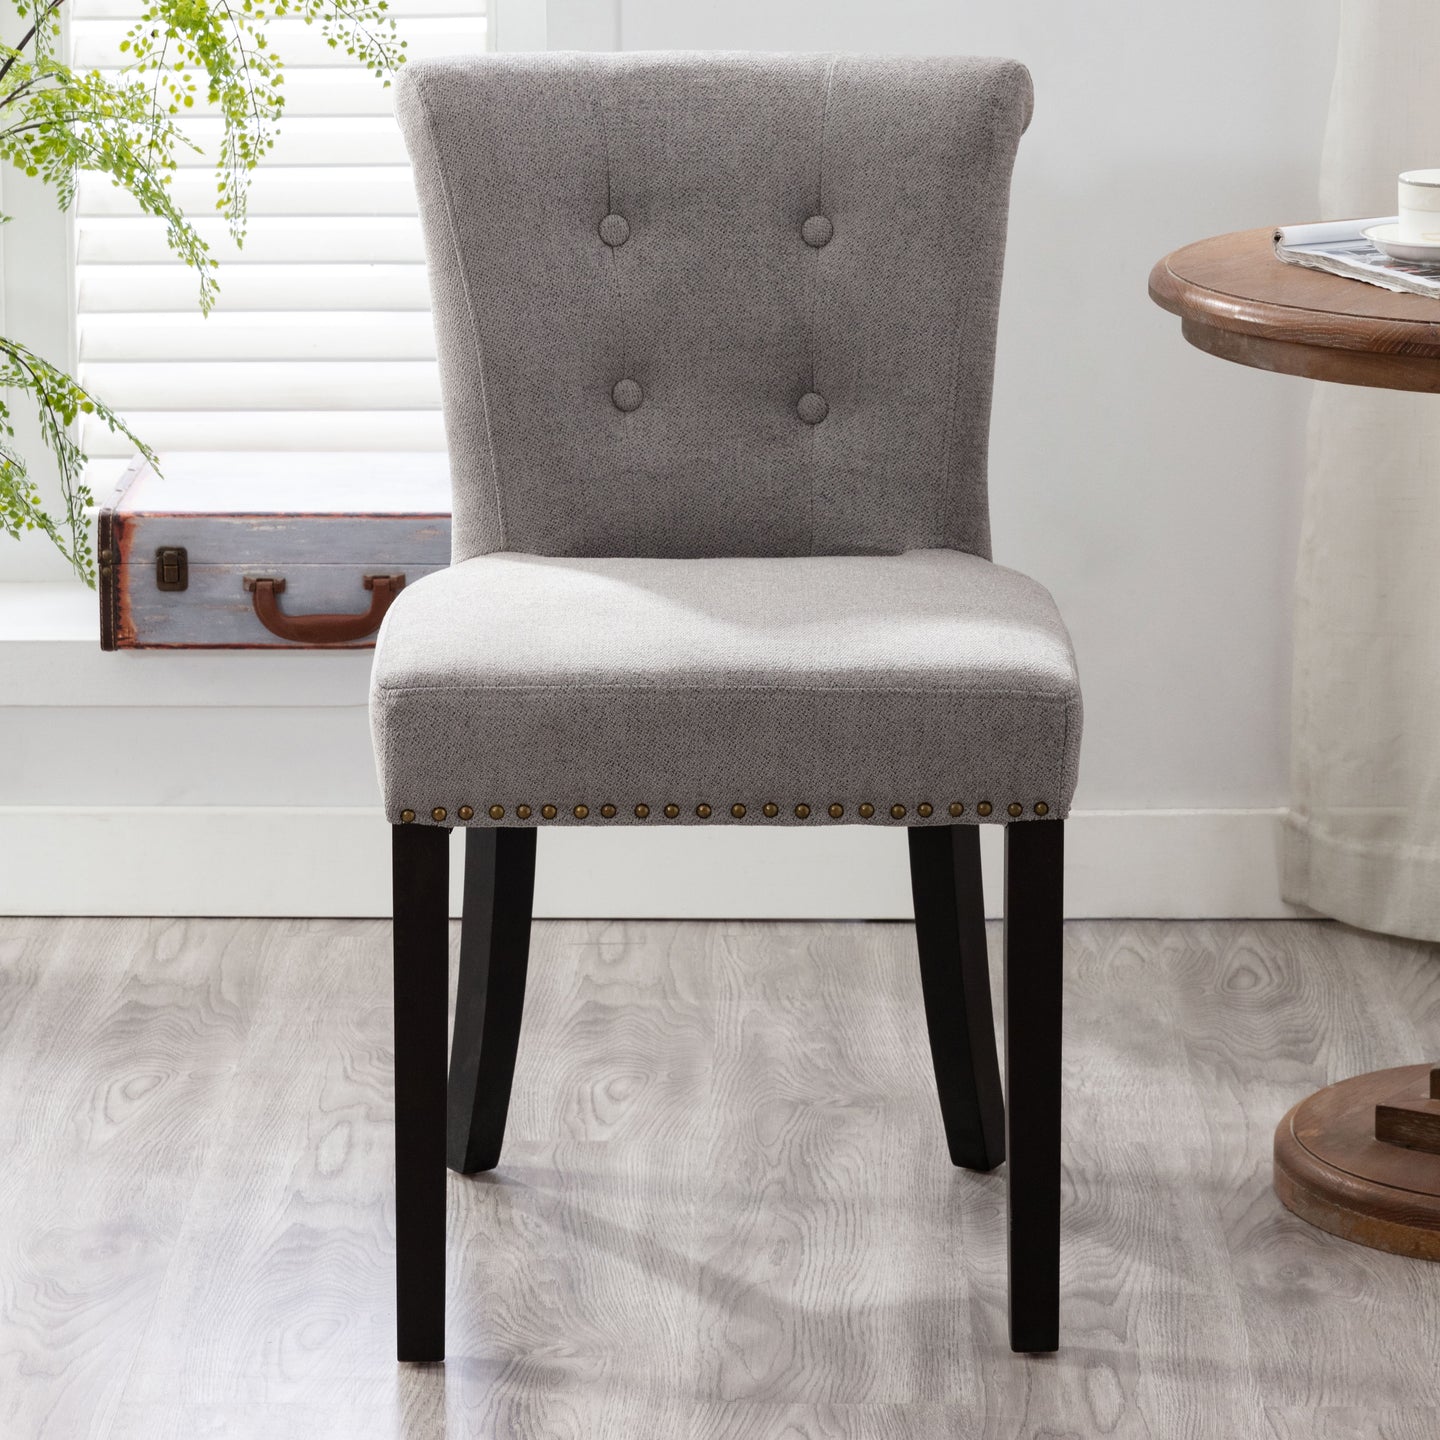 Marcel dining chair